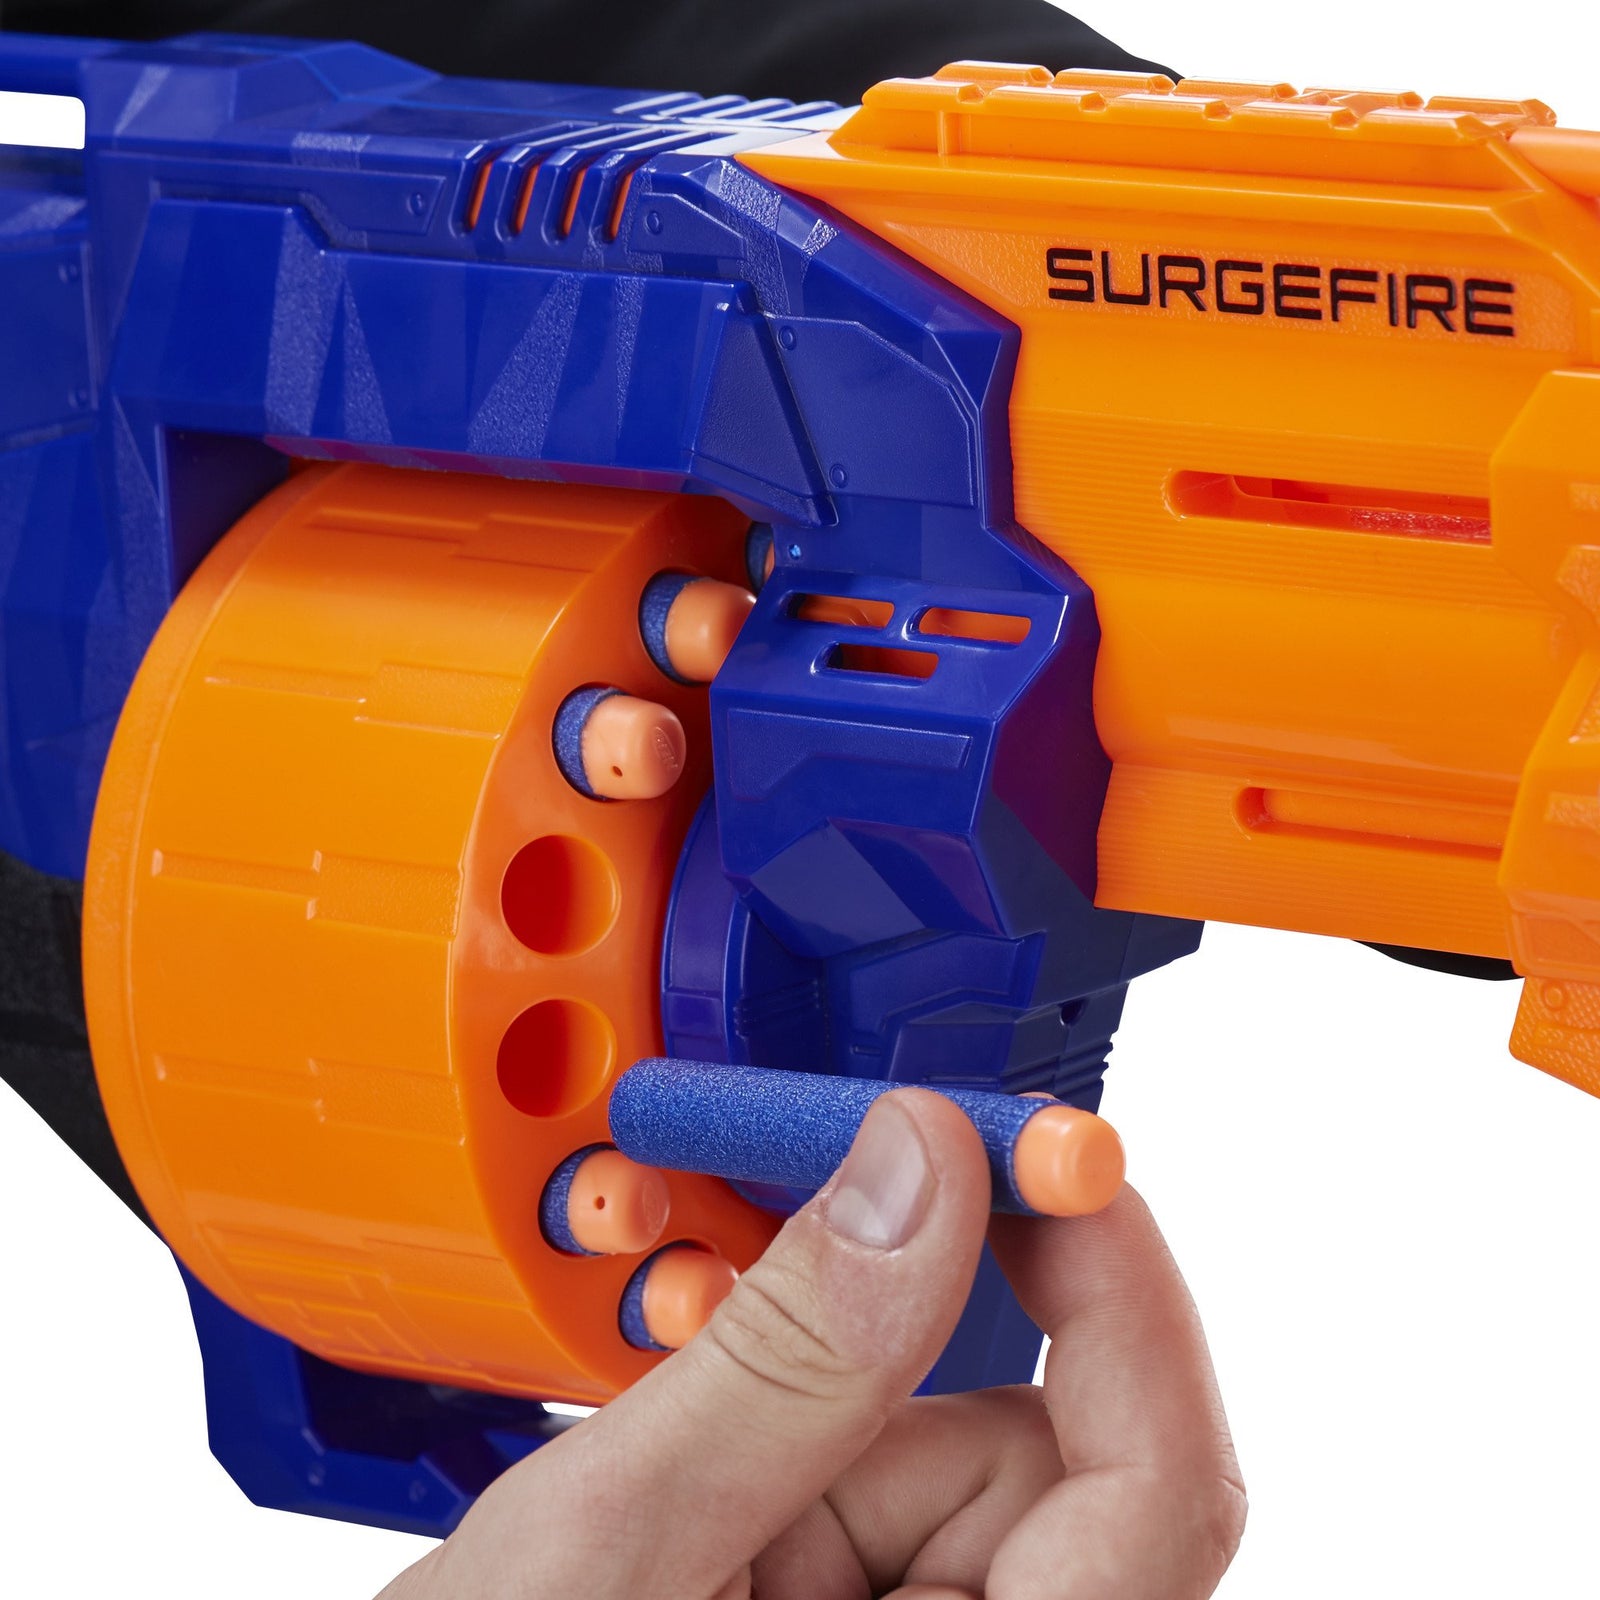 Nerf SurgeFire Elite Blaster -- 15-Dart Rotating Drum, Slam Fire, Includes 15 Official Nerf Elite Darts -- For Kids, Teens, Adults (Amazon Exclusive)